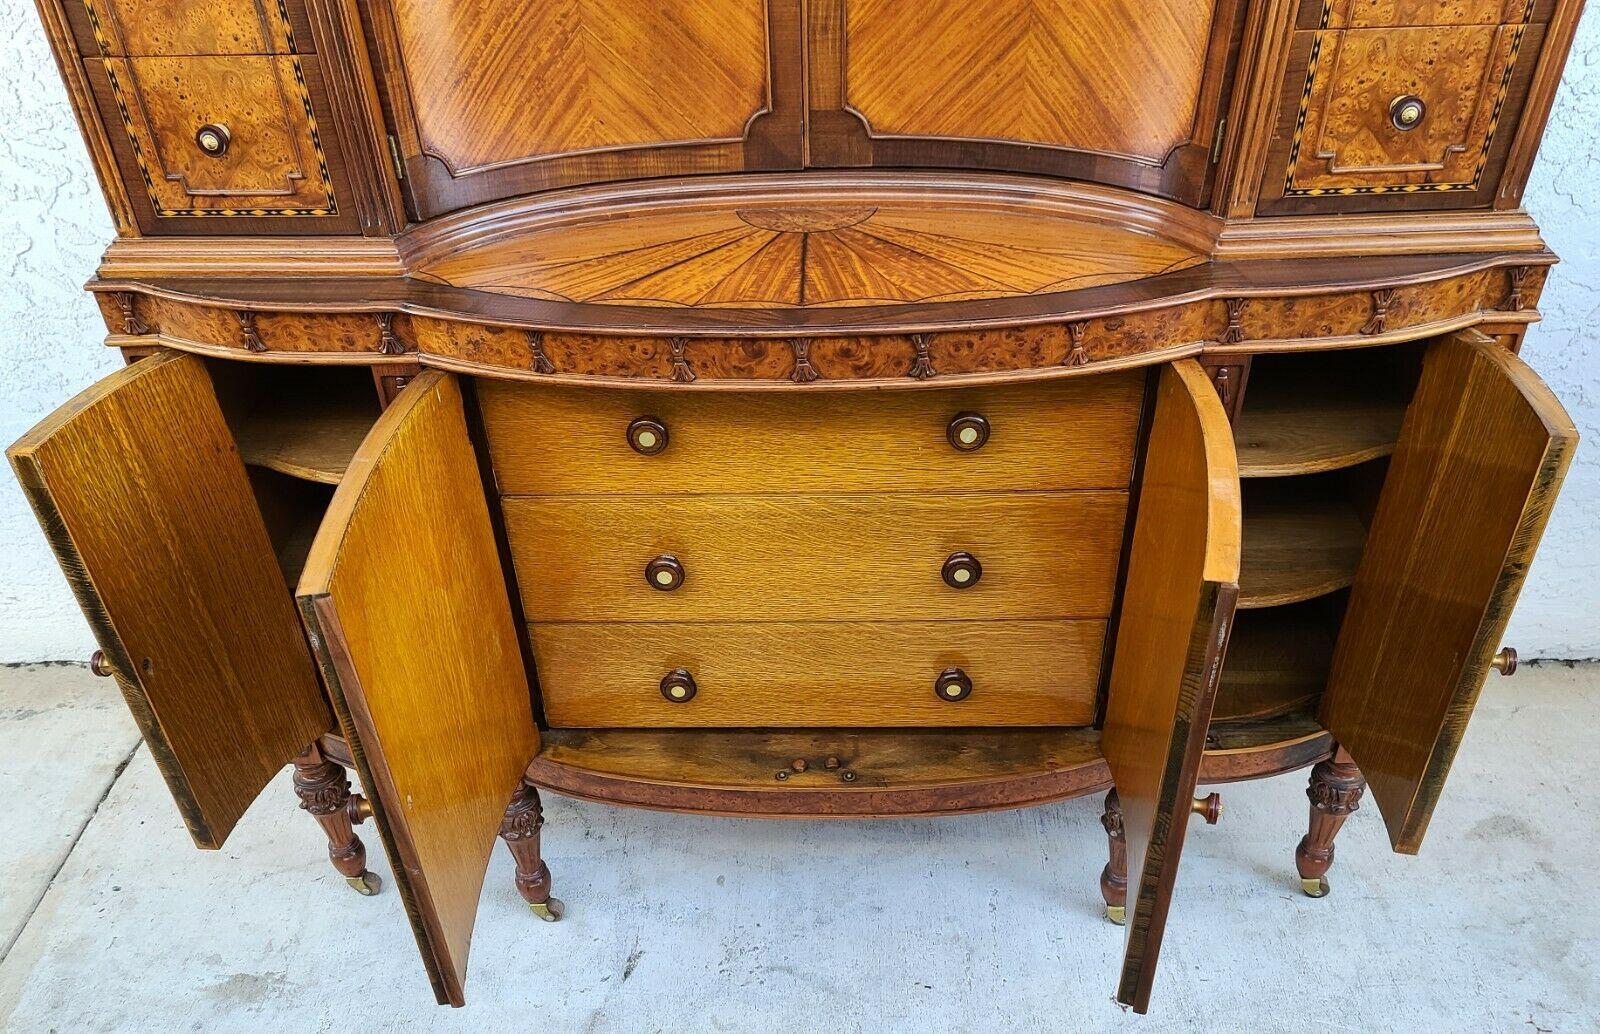 Offering one of our recent palm beach estate fine furniture acquisitions Of An 
Antique Art Nouveau Amboyna Burl Hand Carved Walnut Dresser

Approximate Measurements in Inches
53